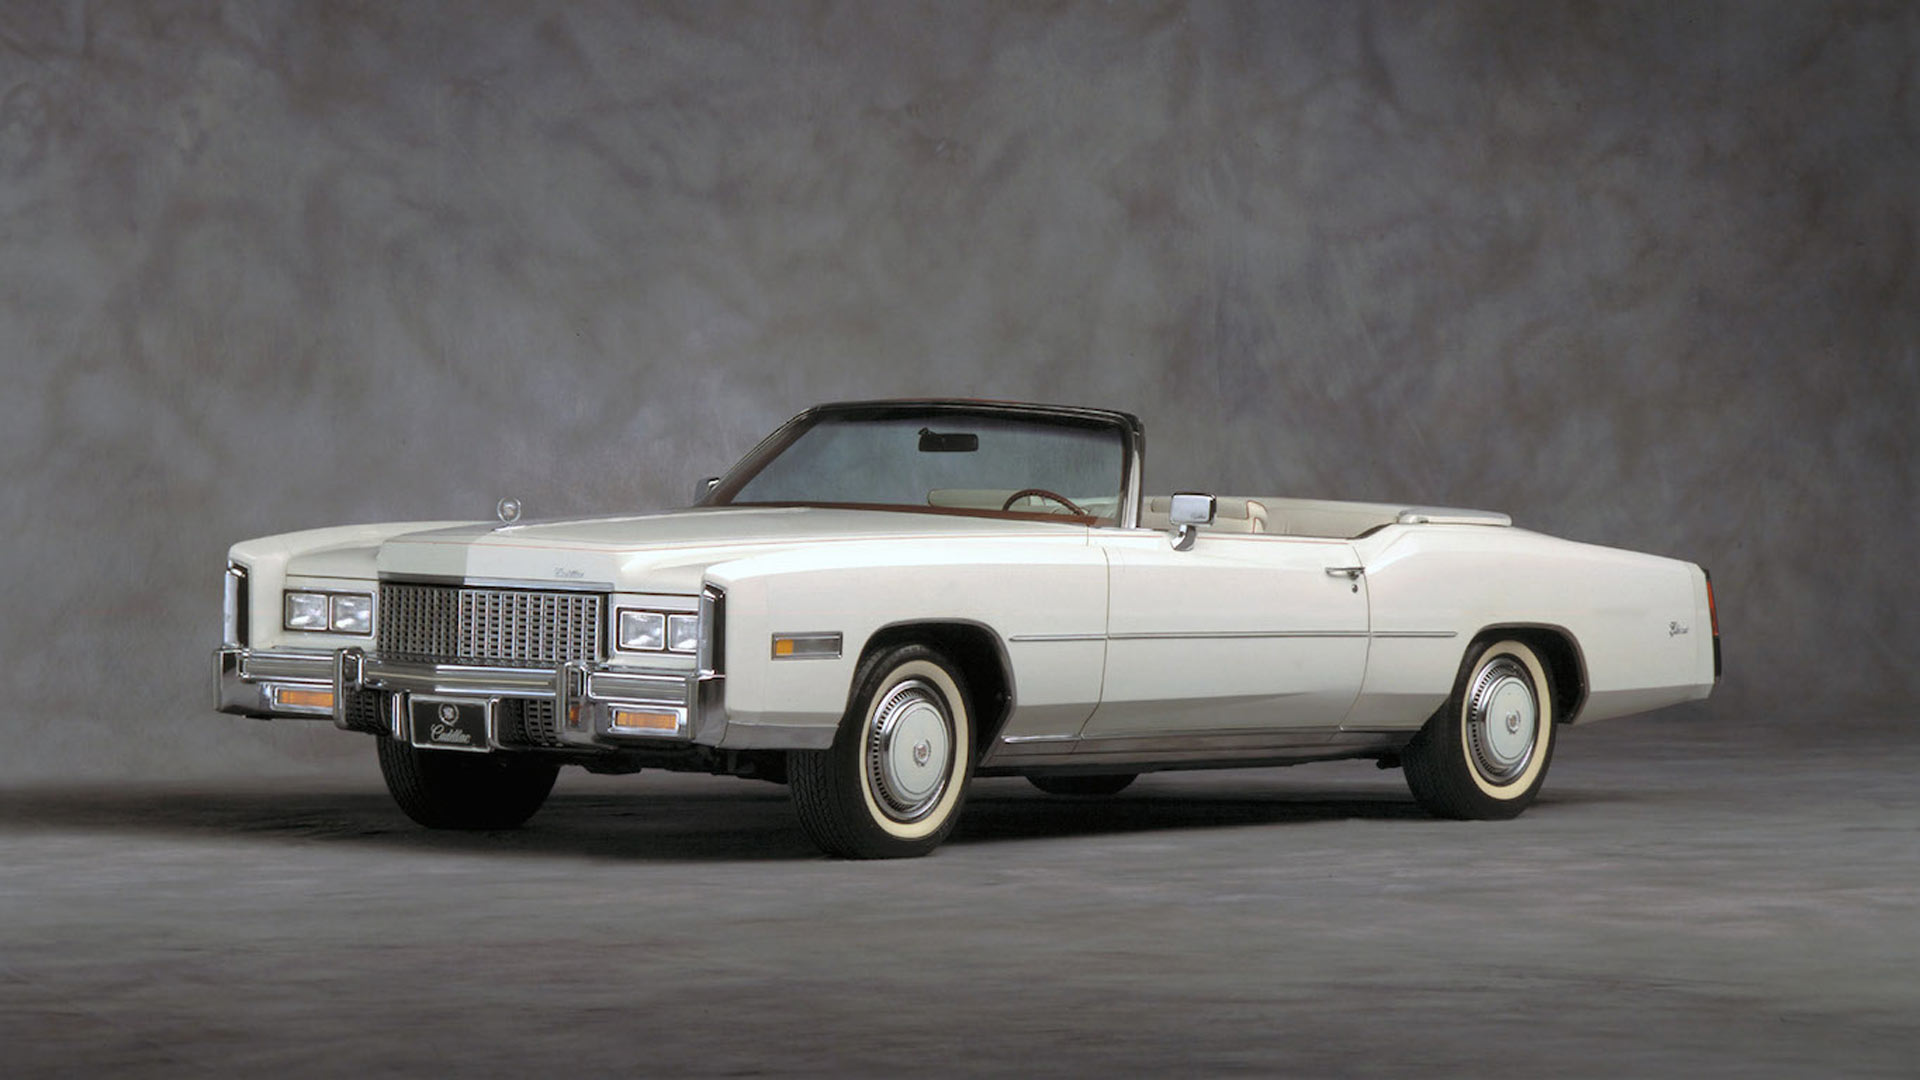 <p>This is decadence! In 1976 Cadillac was very keen to stress that the Eldorado was the last American convertible. Features such as automatic climate control and leather six-way adjustable power seats pushed the Eldorado’s weight to 5,153 lb.</p> <p>Thankfully propulsion came from an extravagant 8.2-liter (500-cubic inch) V8 motor, even if all that displacement could only generate 235hp. Owners might have been even more grateful for the standard ventilated disc brakes.</p>